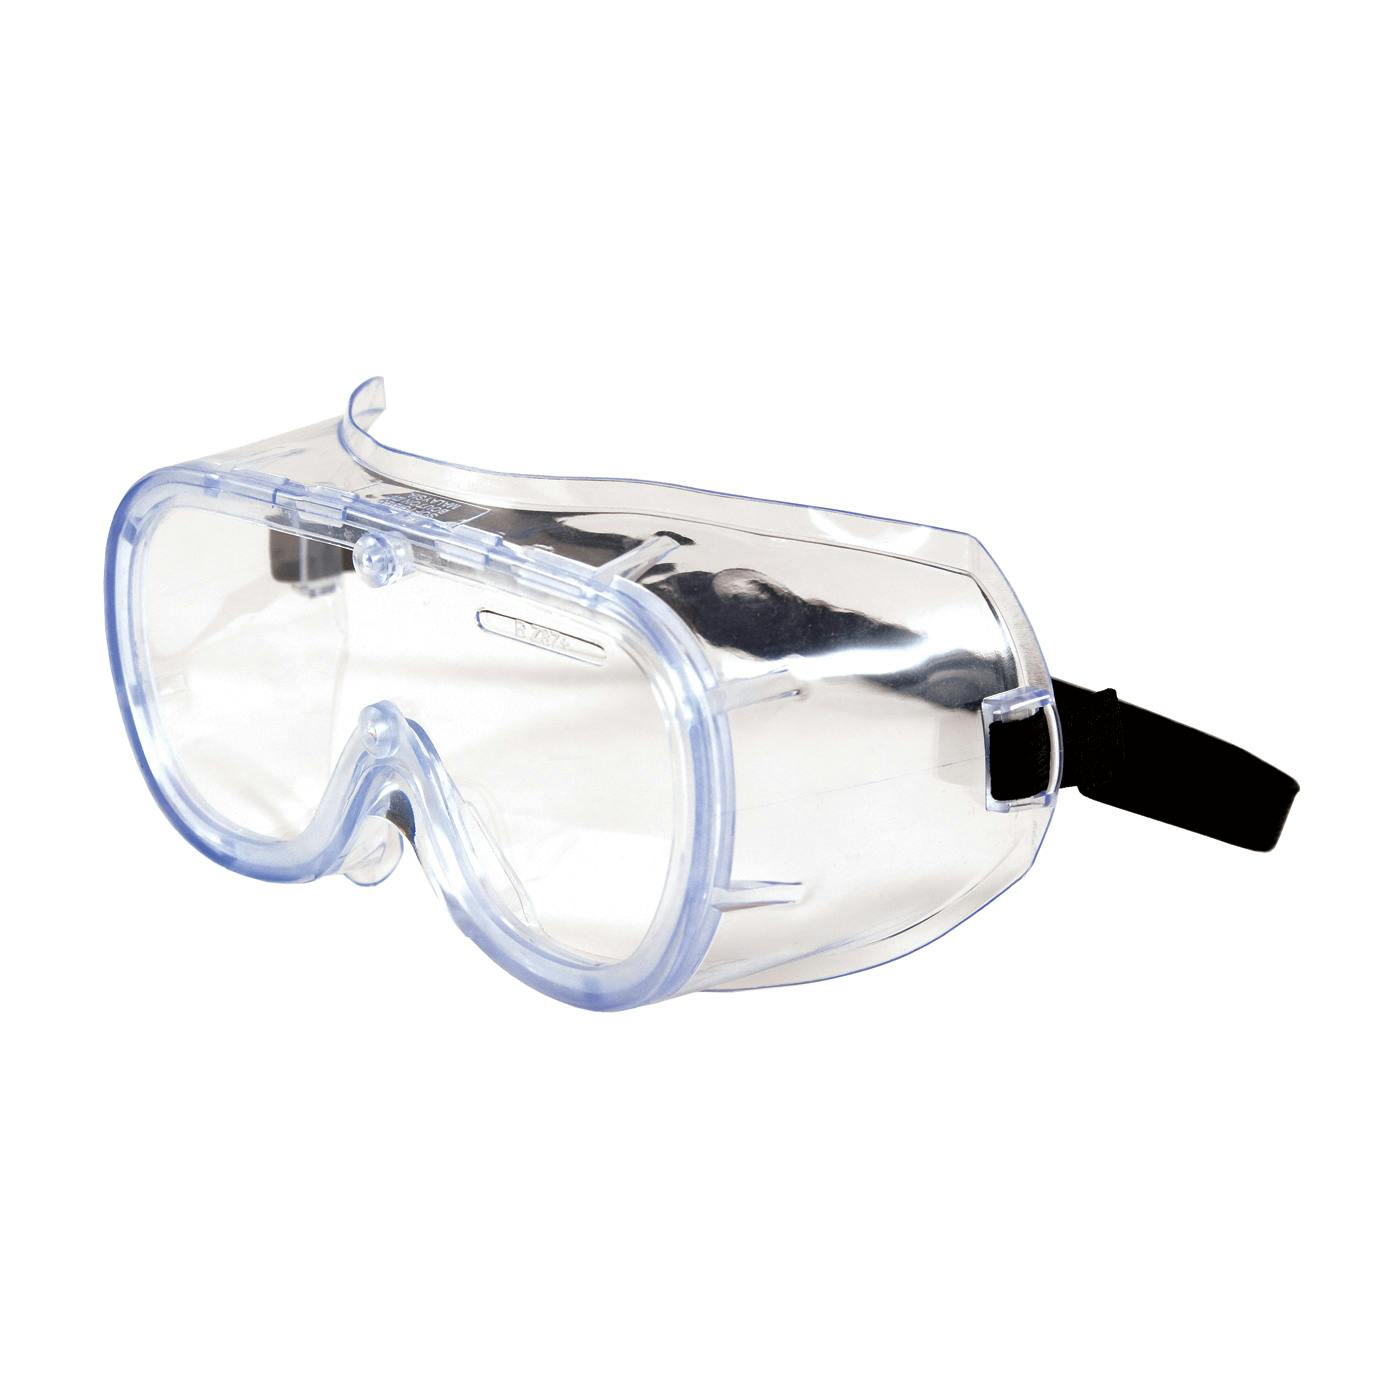 Non-Vented Goggle with Clear Blue Body, Clear Lens and Anti-Scratch / Anti-Fog Coating, Clear (248-5290-400B) - OS_0